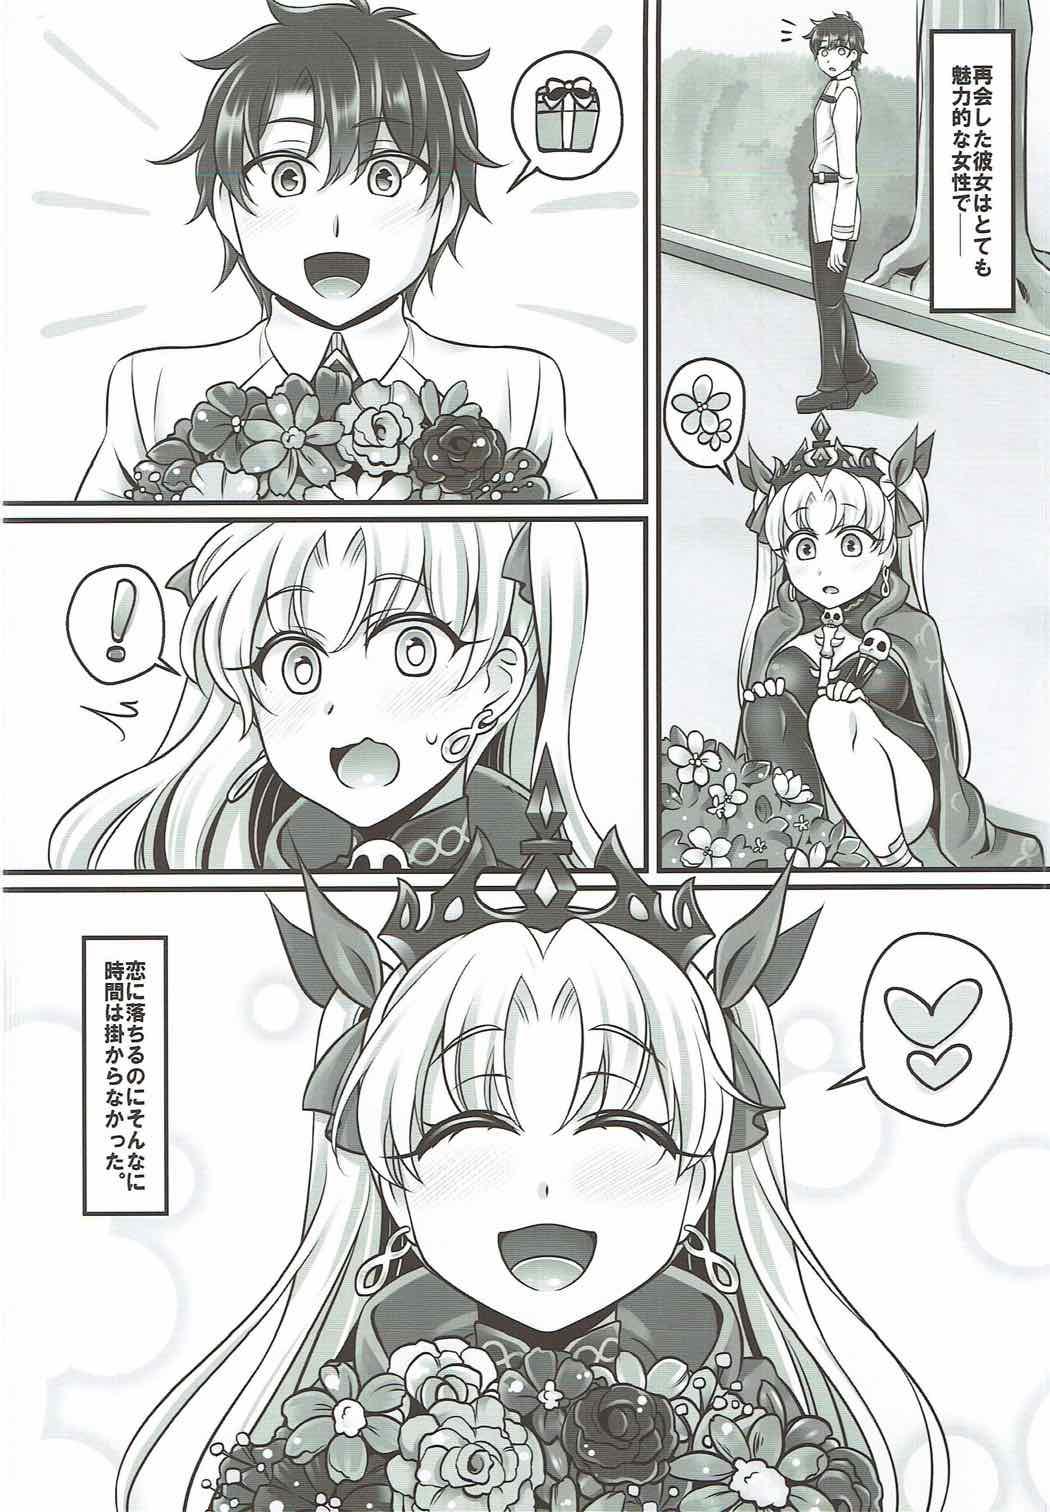 Motel Ere Love - Fate grand order 18 Year Old - Page 3